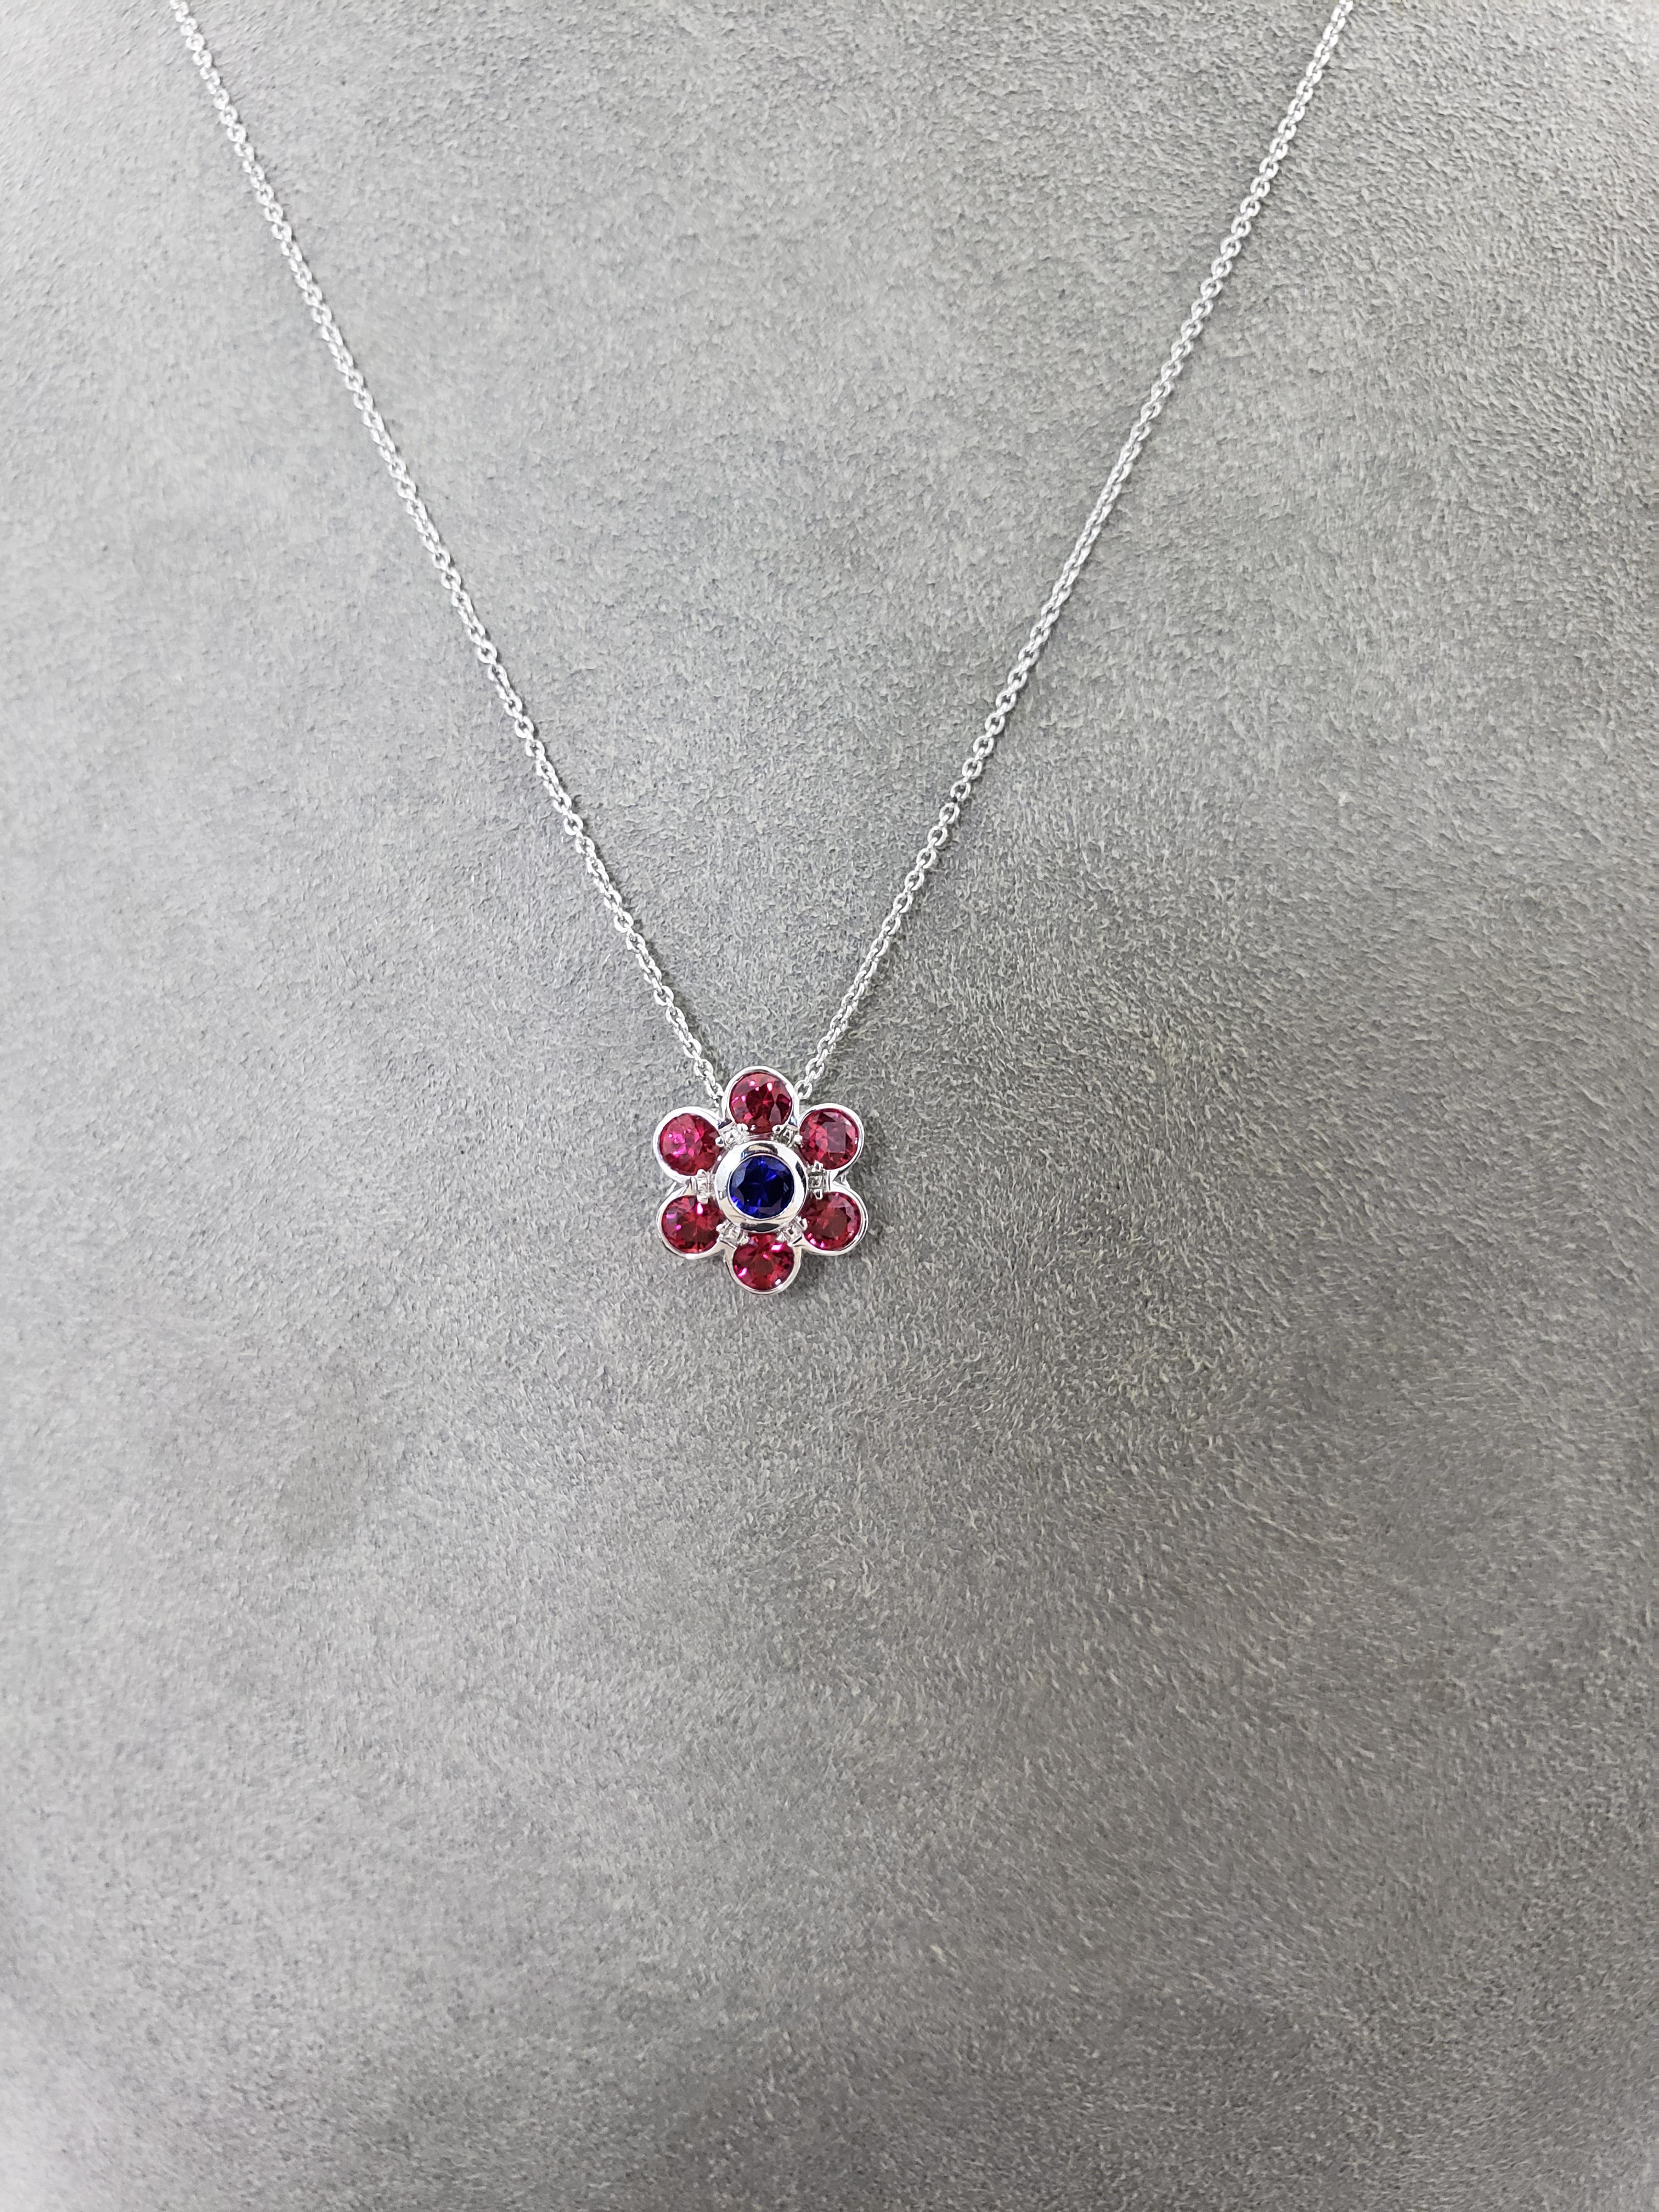 Contemporary Roman Malakov Ruby and Sapphire Flower Pendant Necklace For Sale